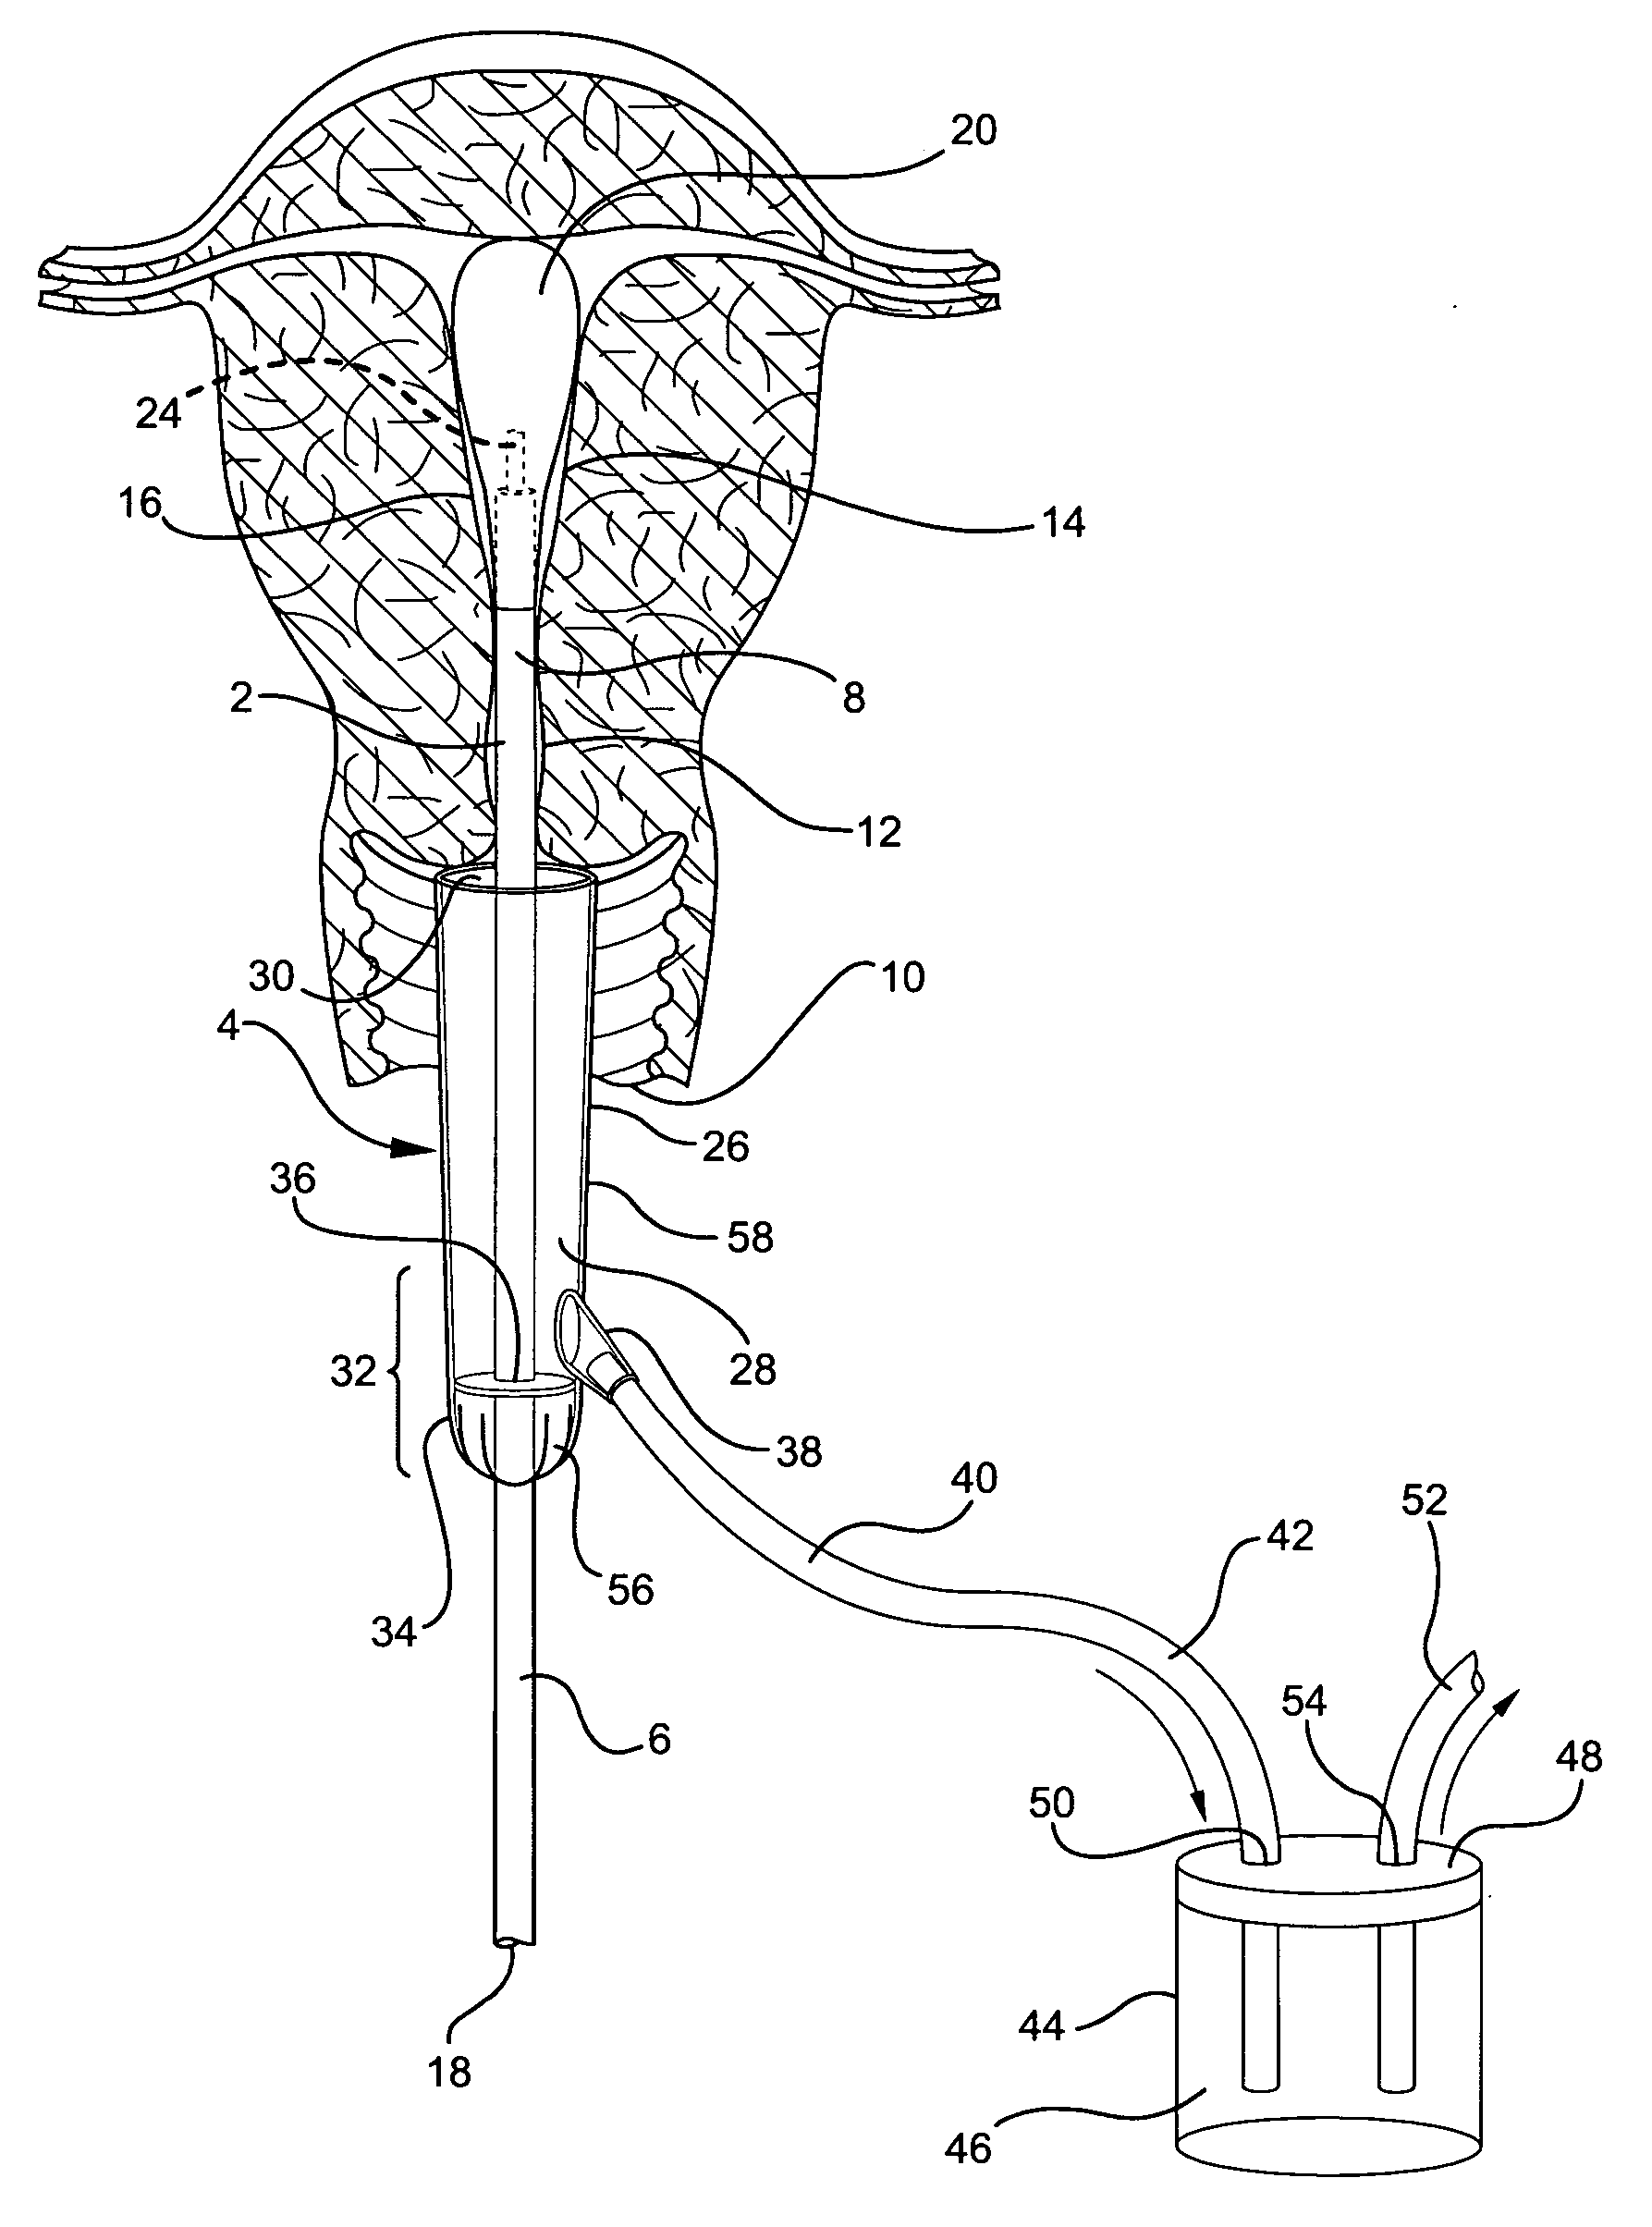 Method and apparatus for vaginal protection from hot fluids during endometrial ablation treatment